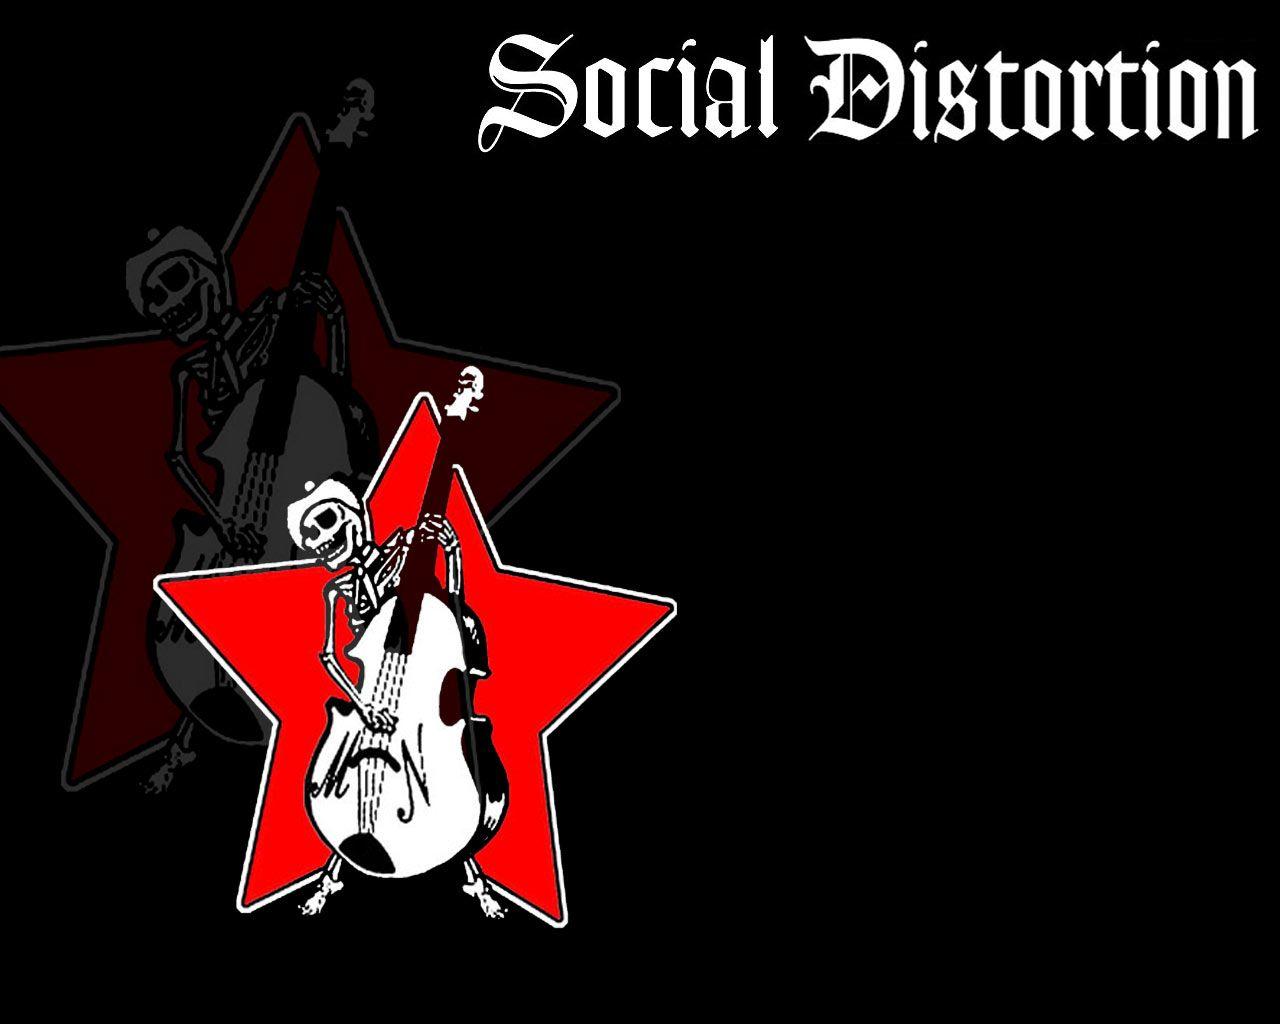 Social Distortion Wallpaper and Background Imagex1024